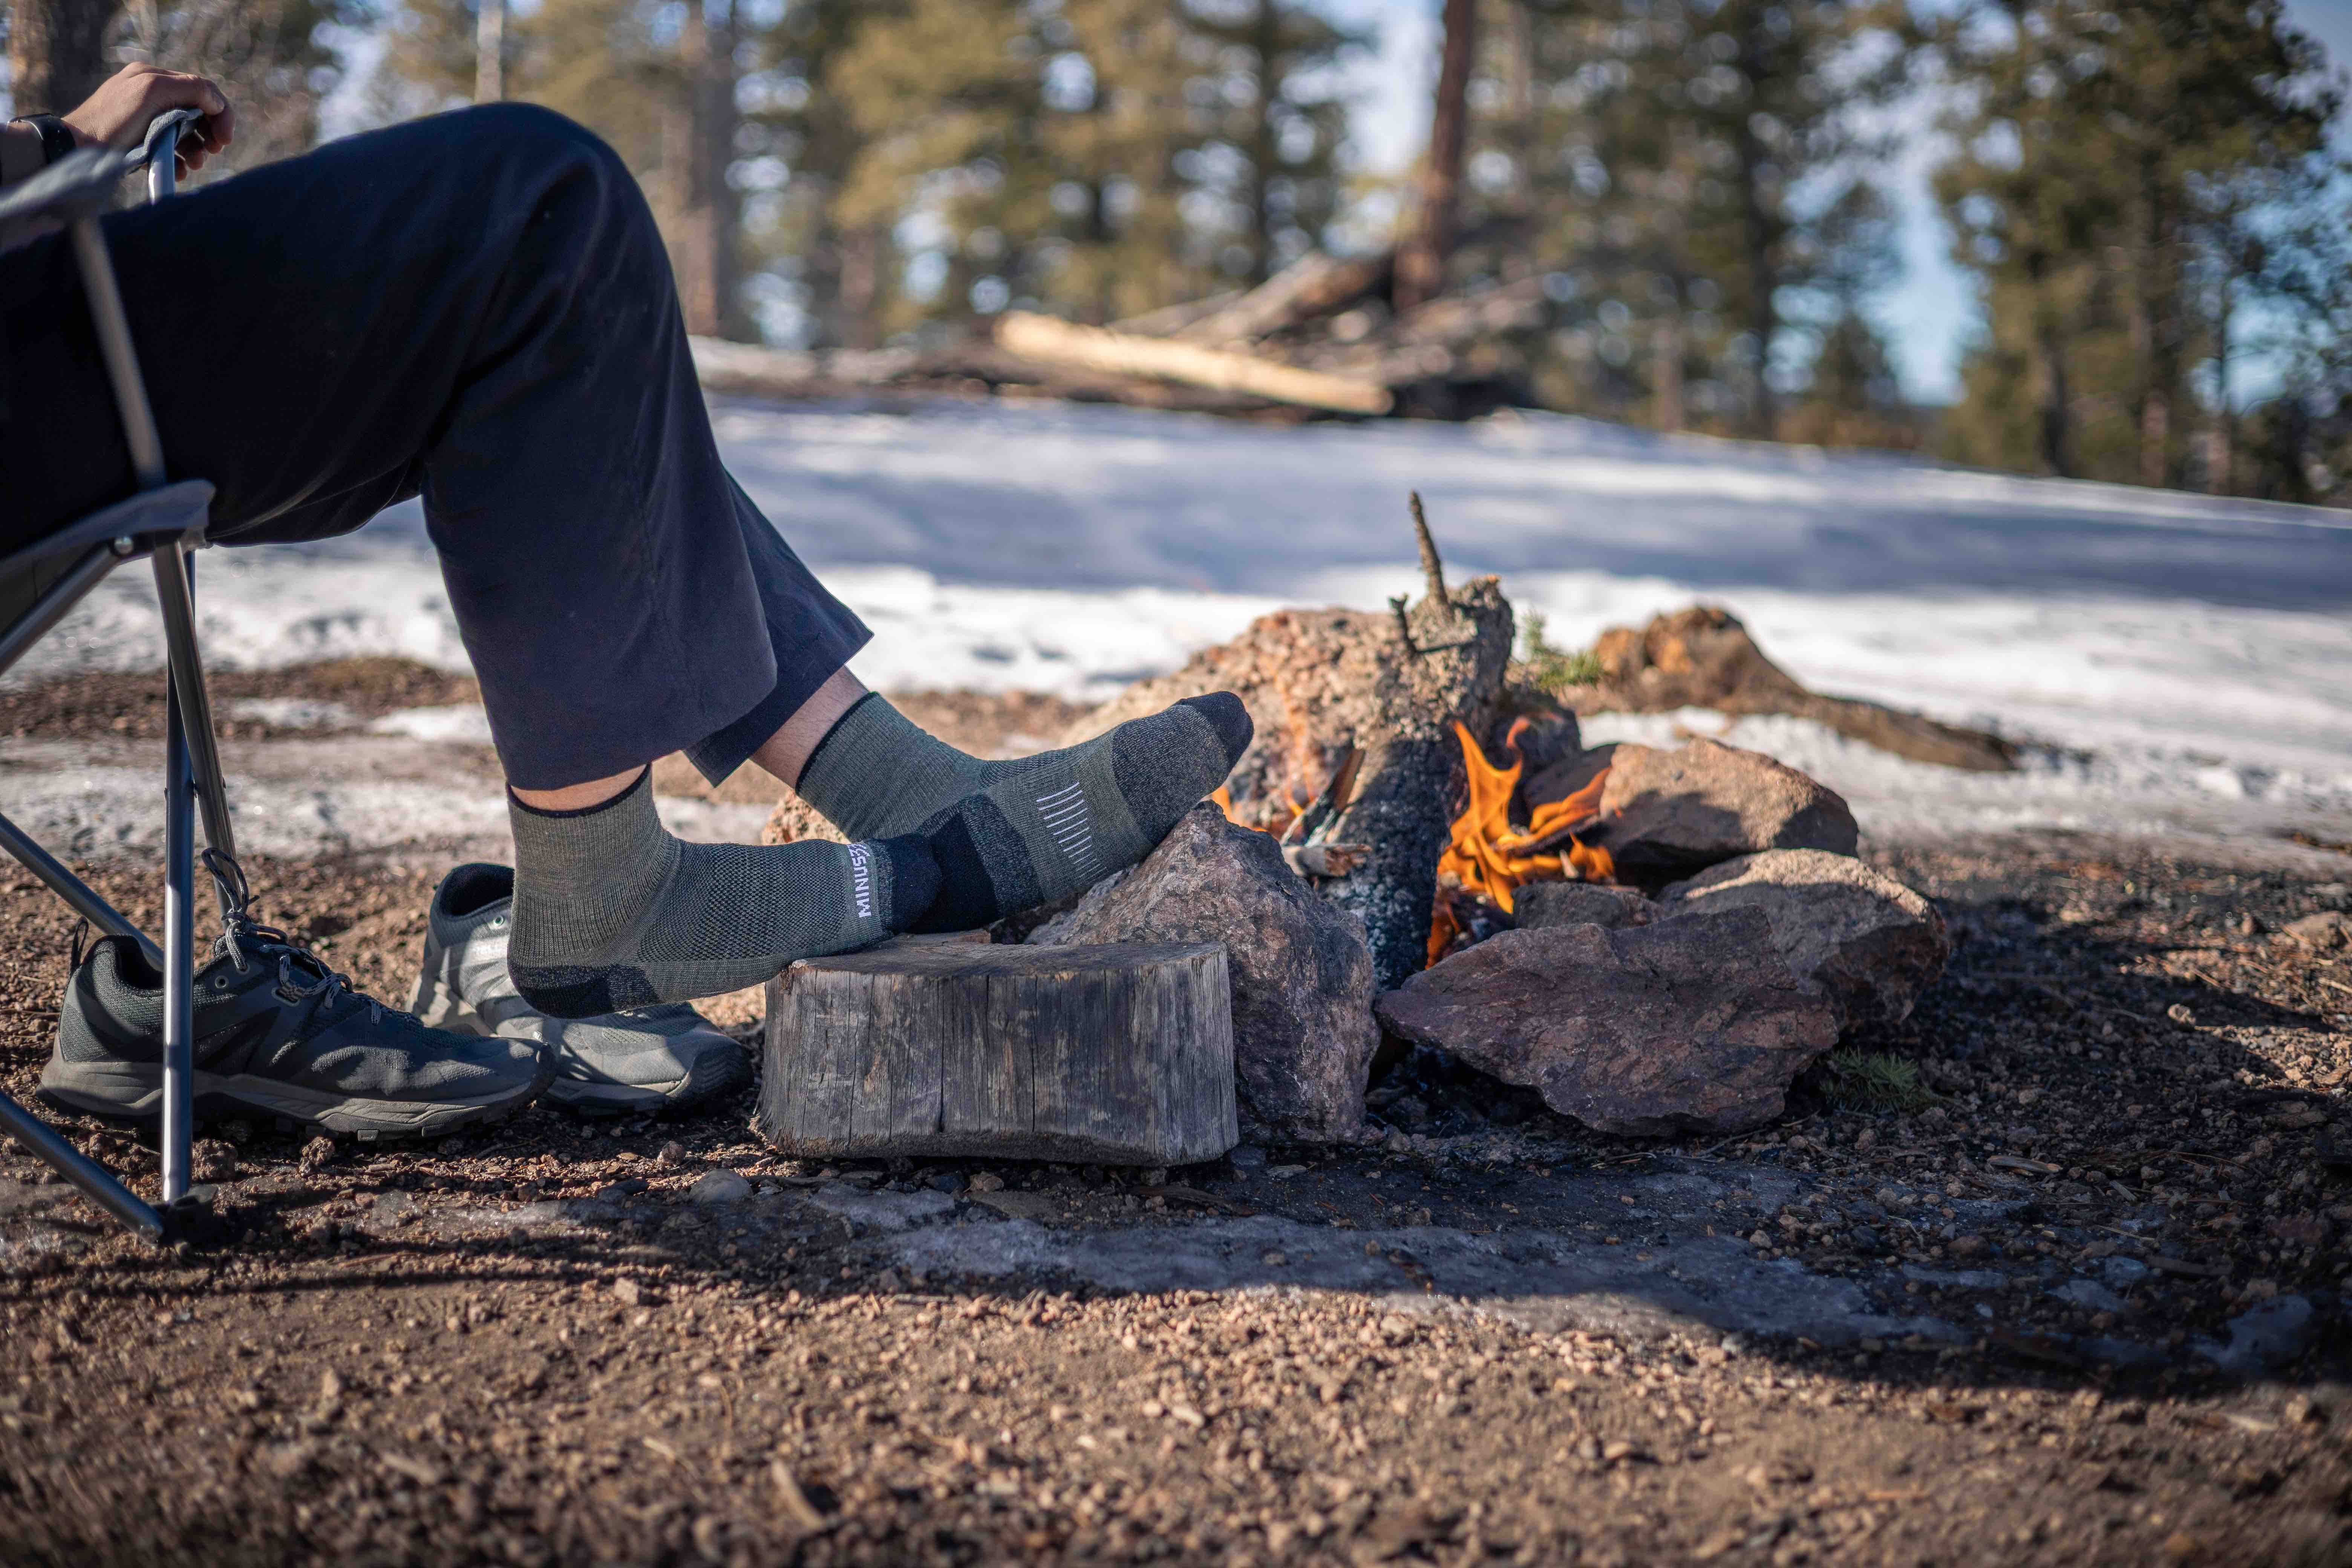 The 6 best socks for troops—for hiking, boots, warm & cold climates